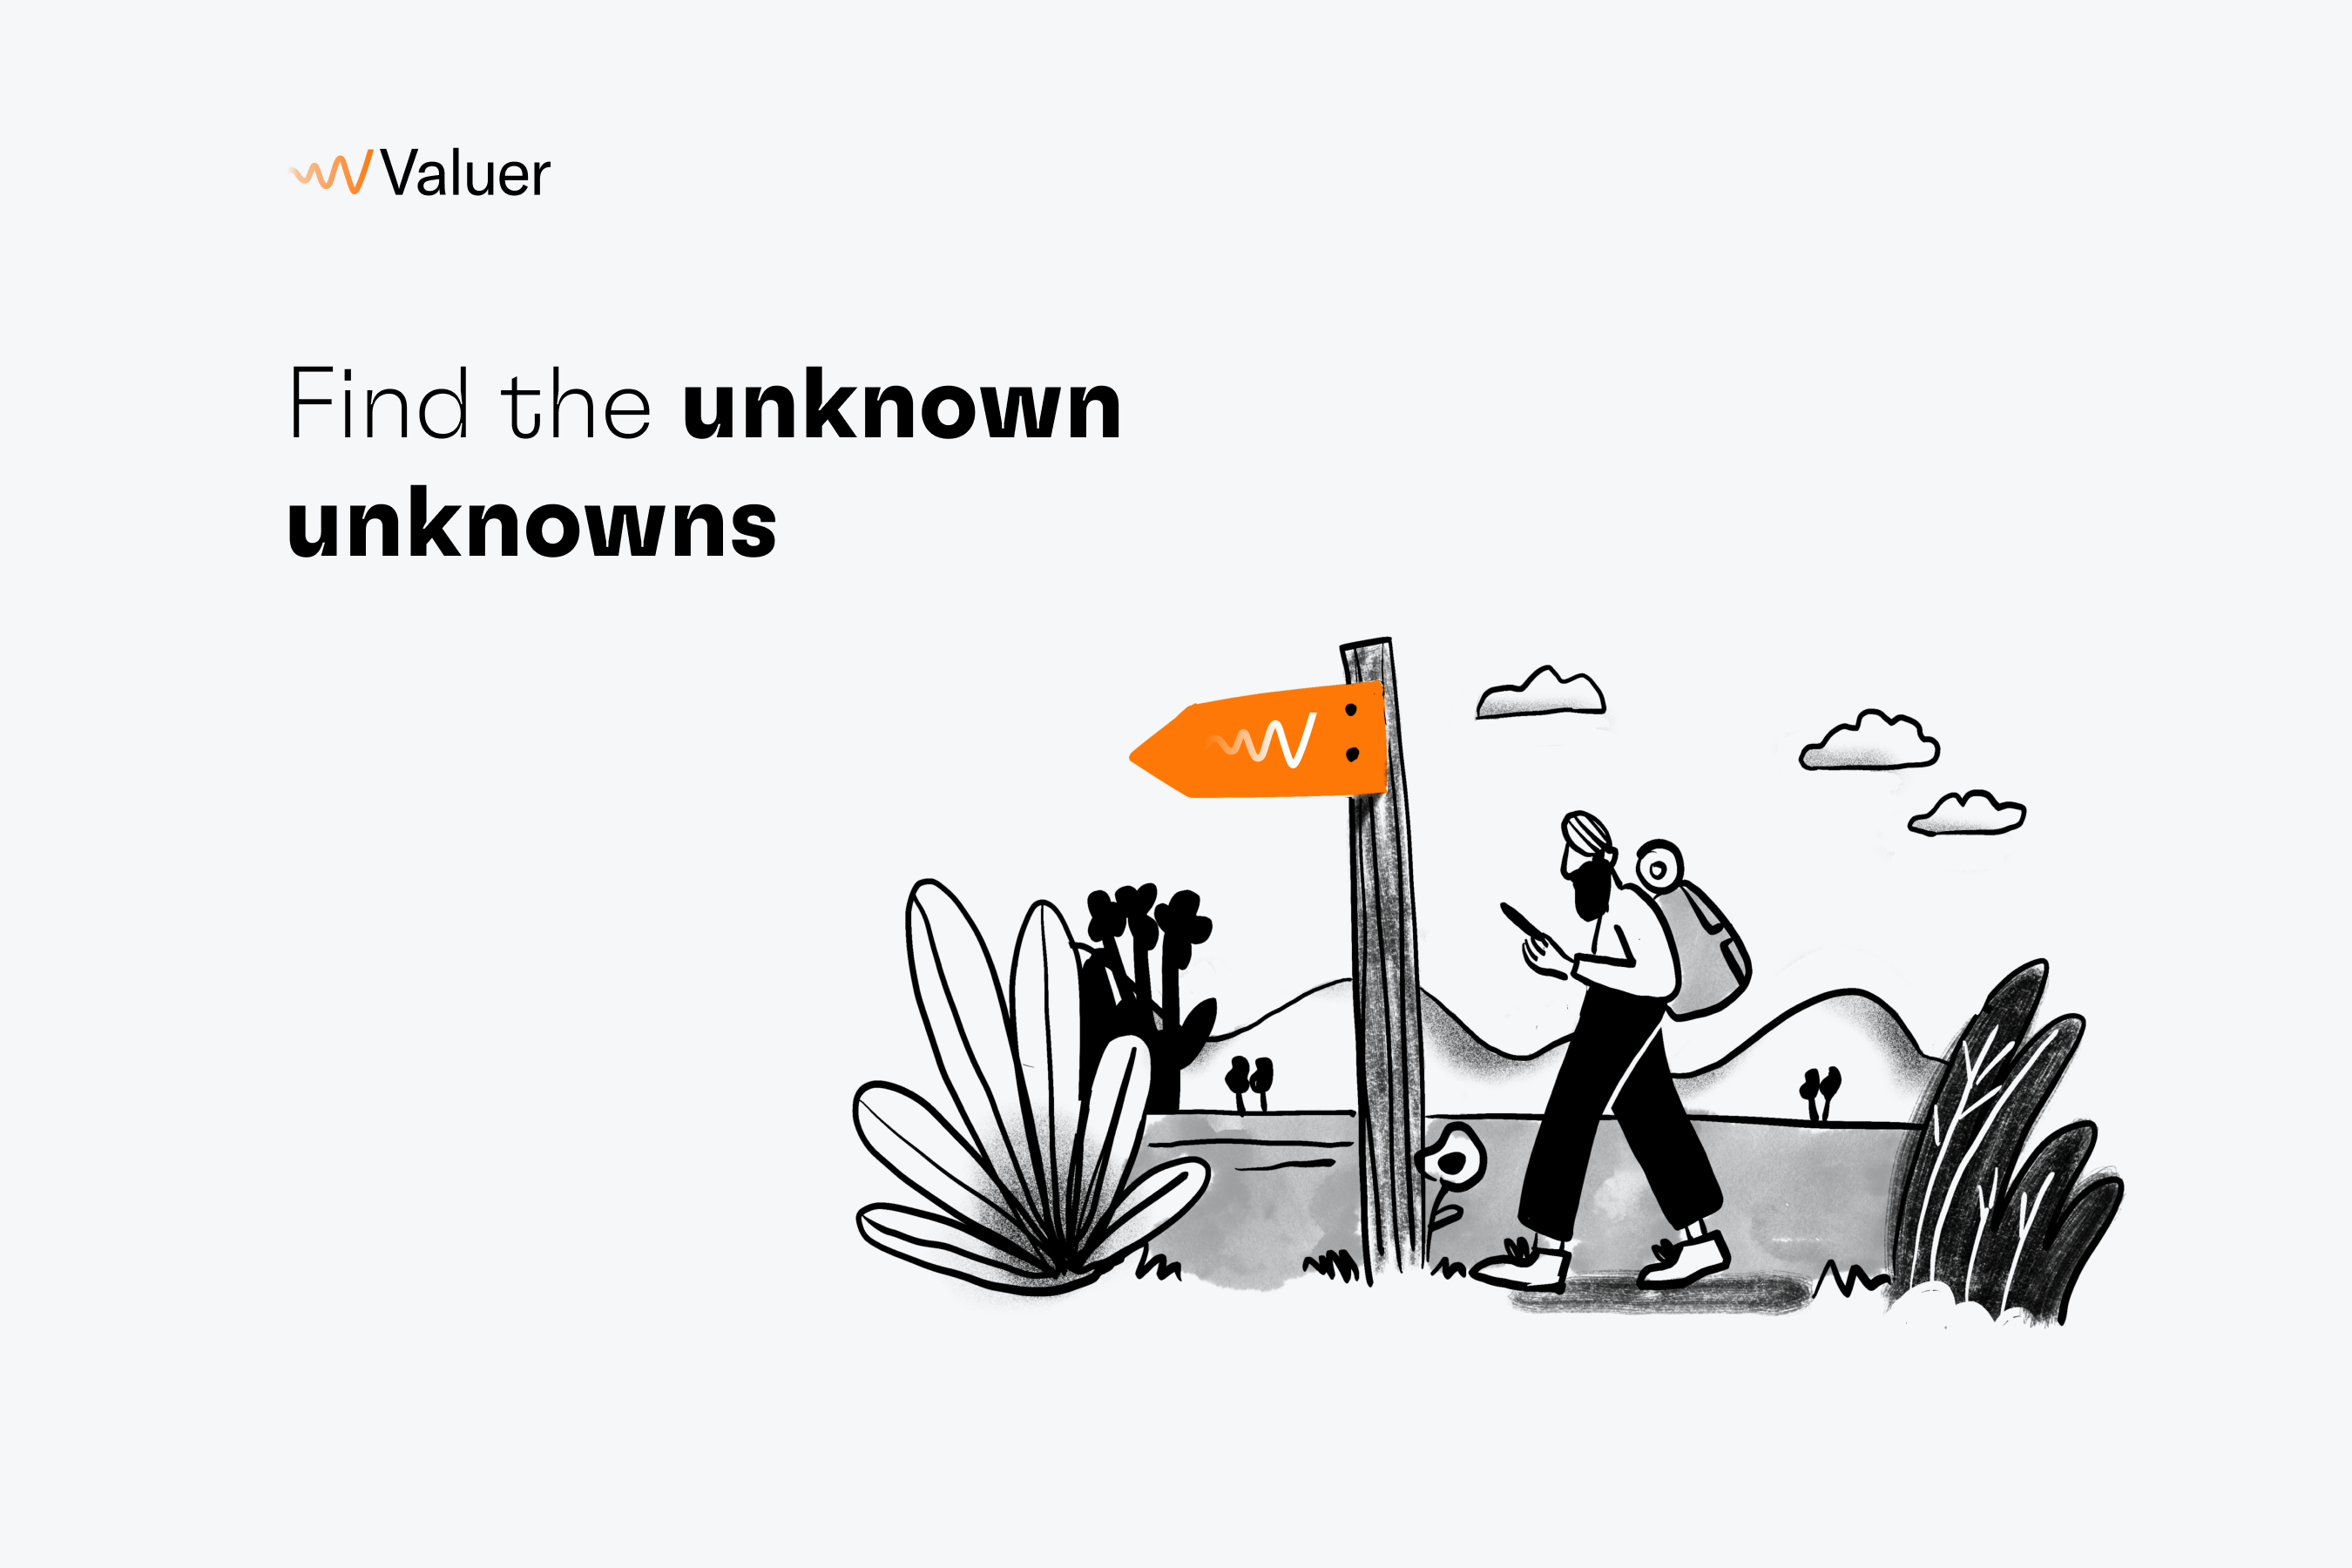 Find the unknown unknowns